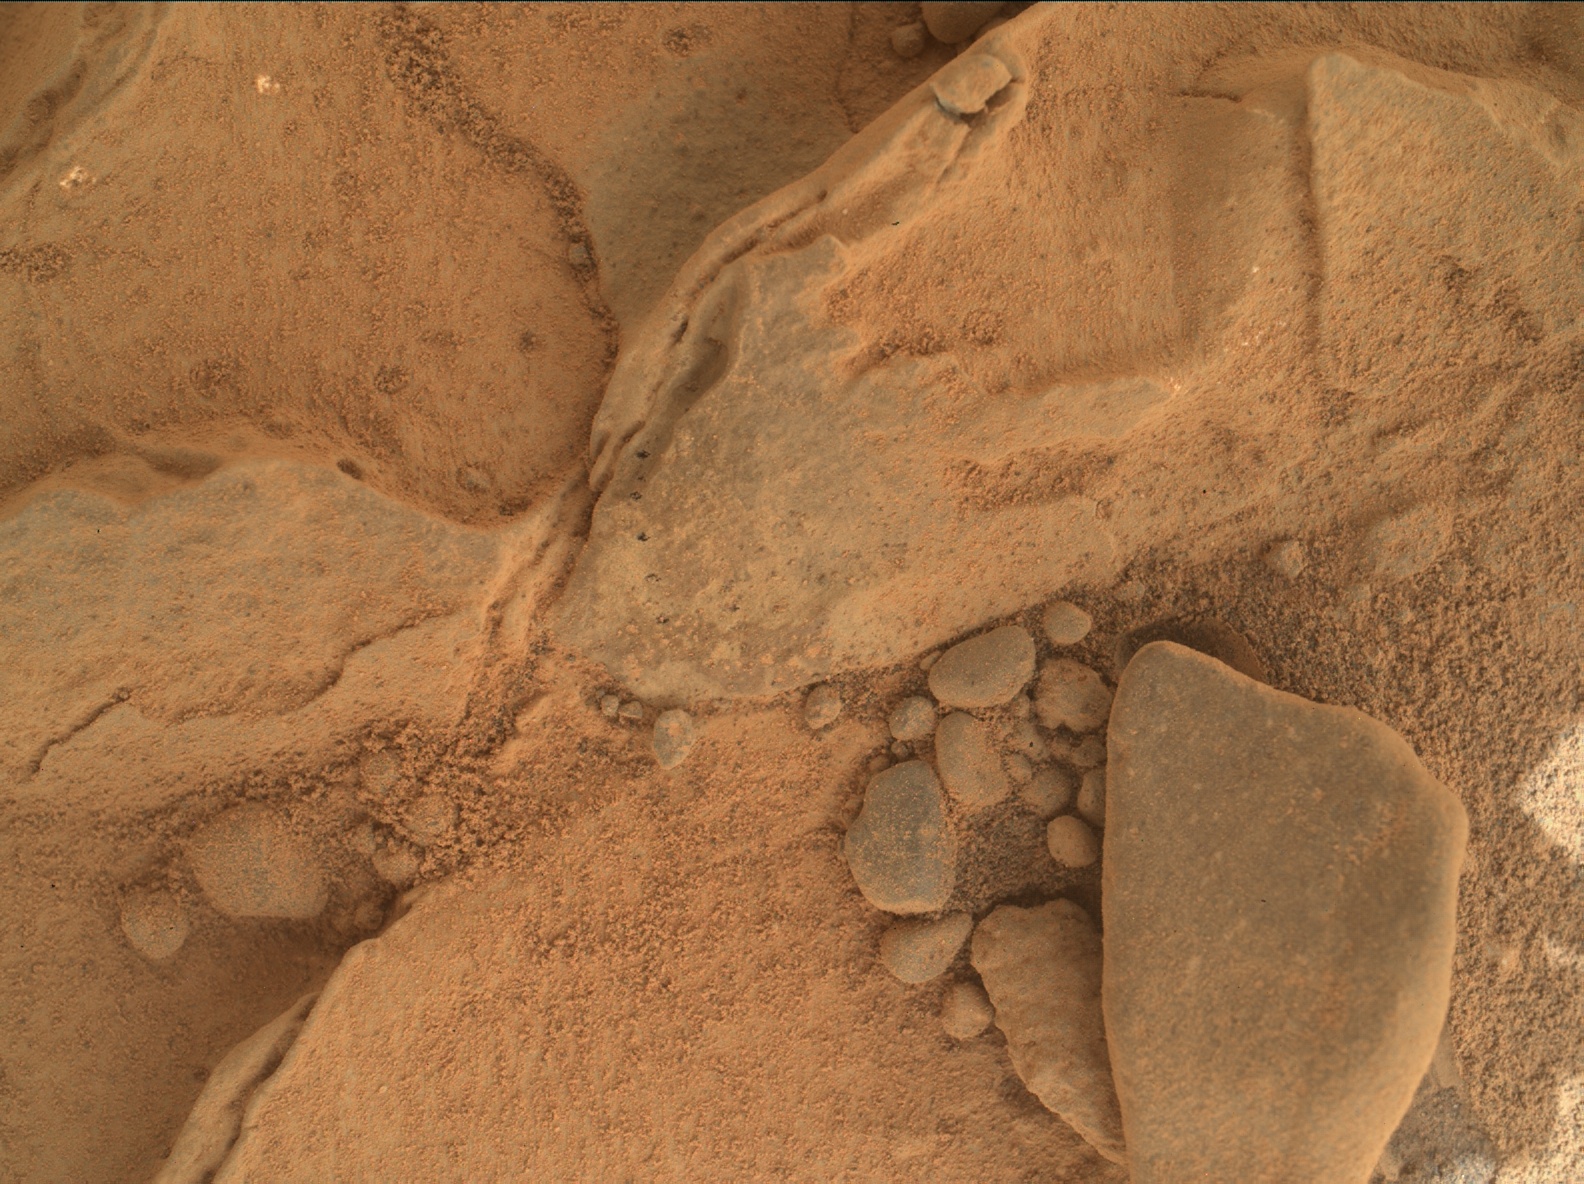 Nasa's Mars rover Curiosity acquired this image using its Mars Hand Lens Imager (MAHLI) on Sol 270